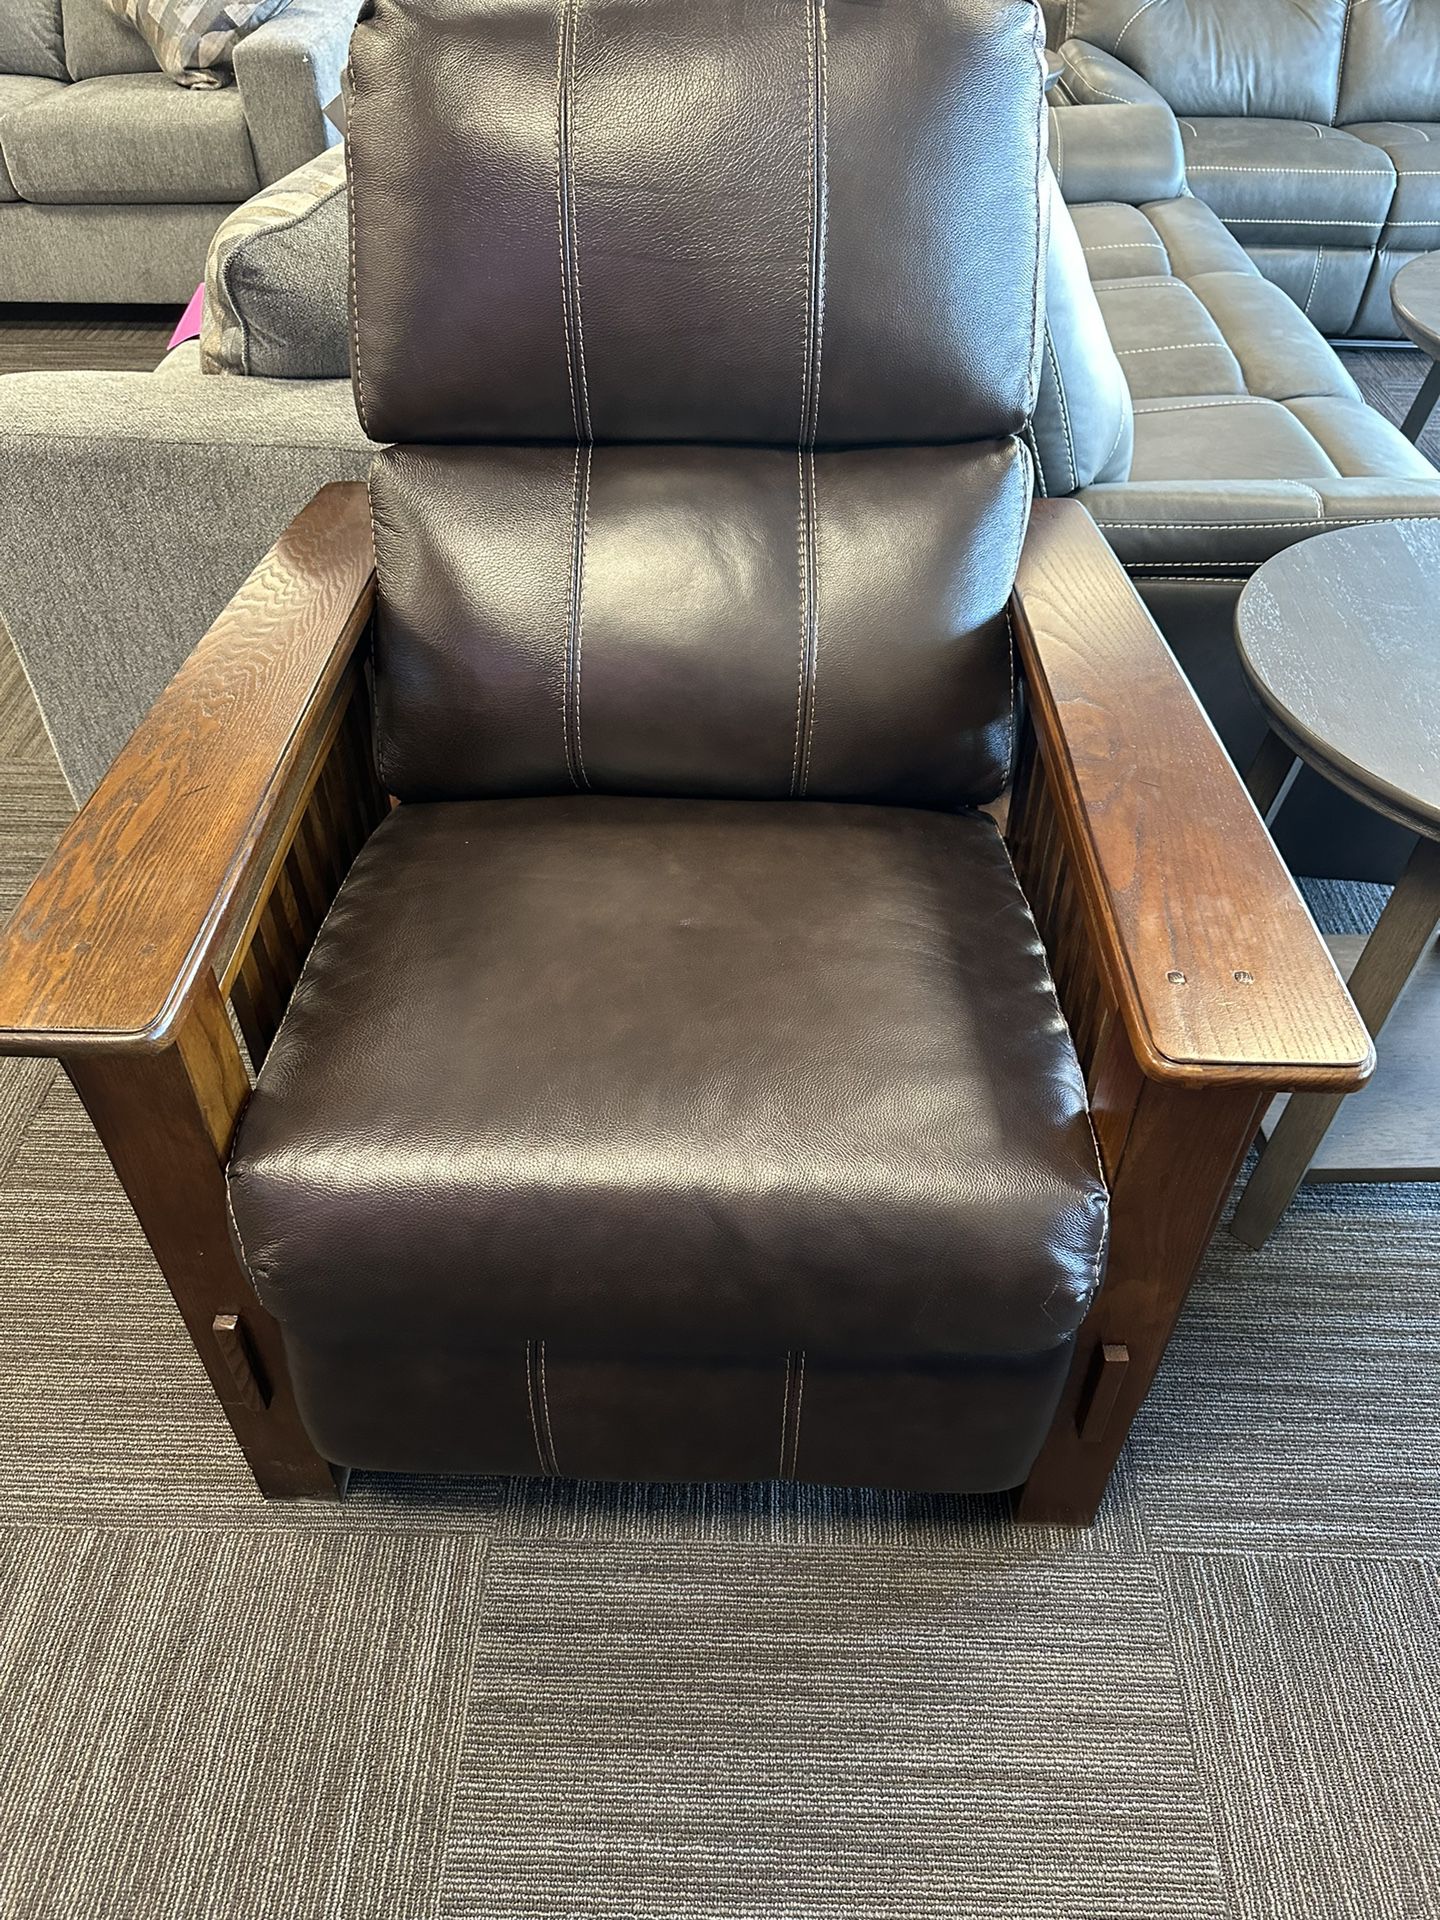 Brown Leather Recliner Comfortable!!!!